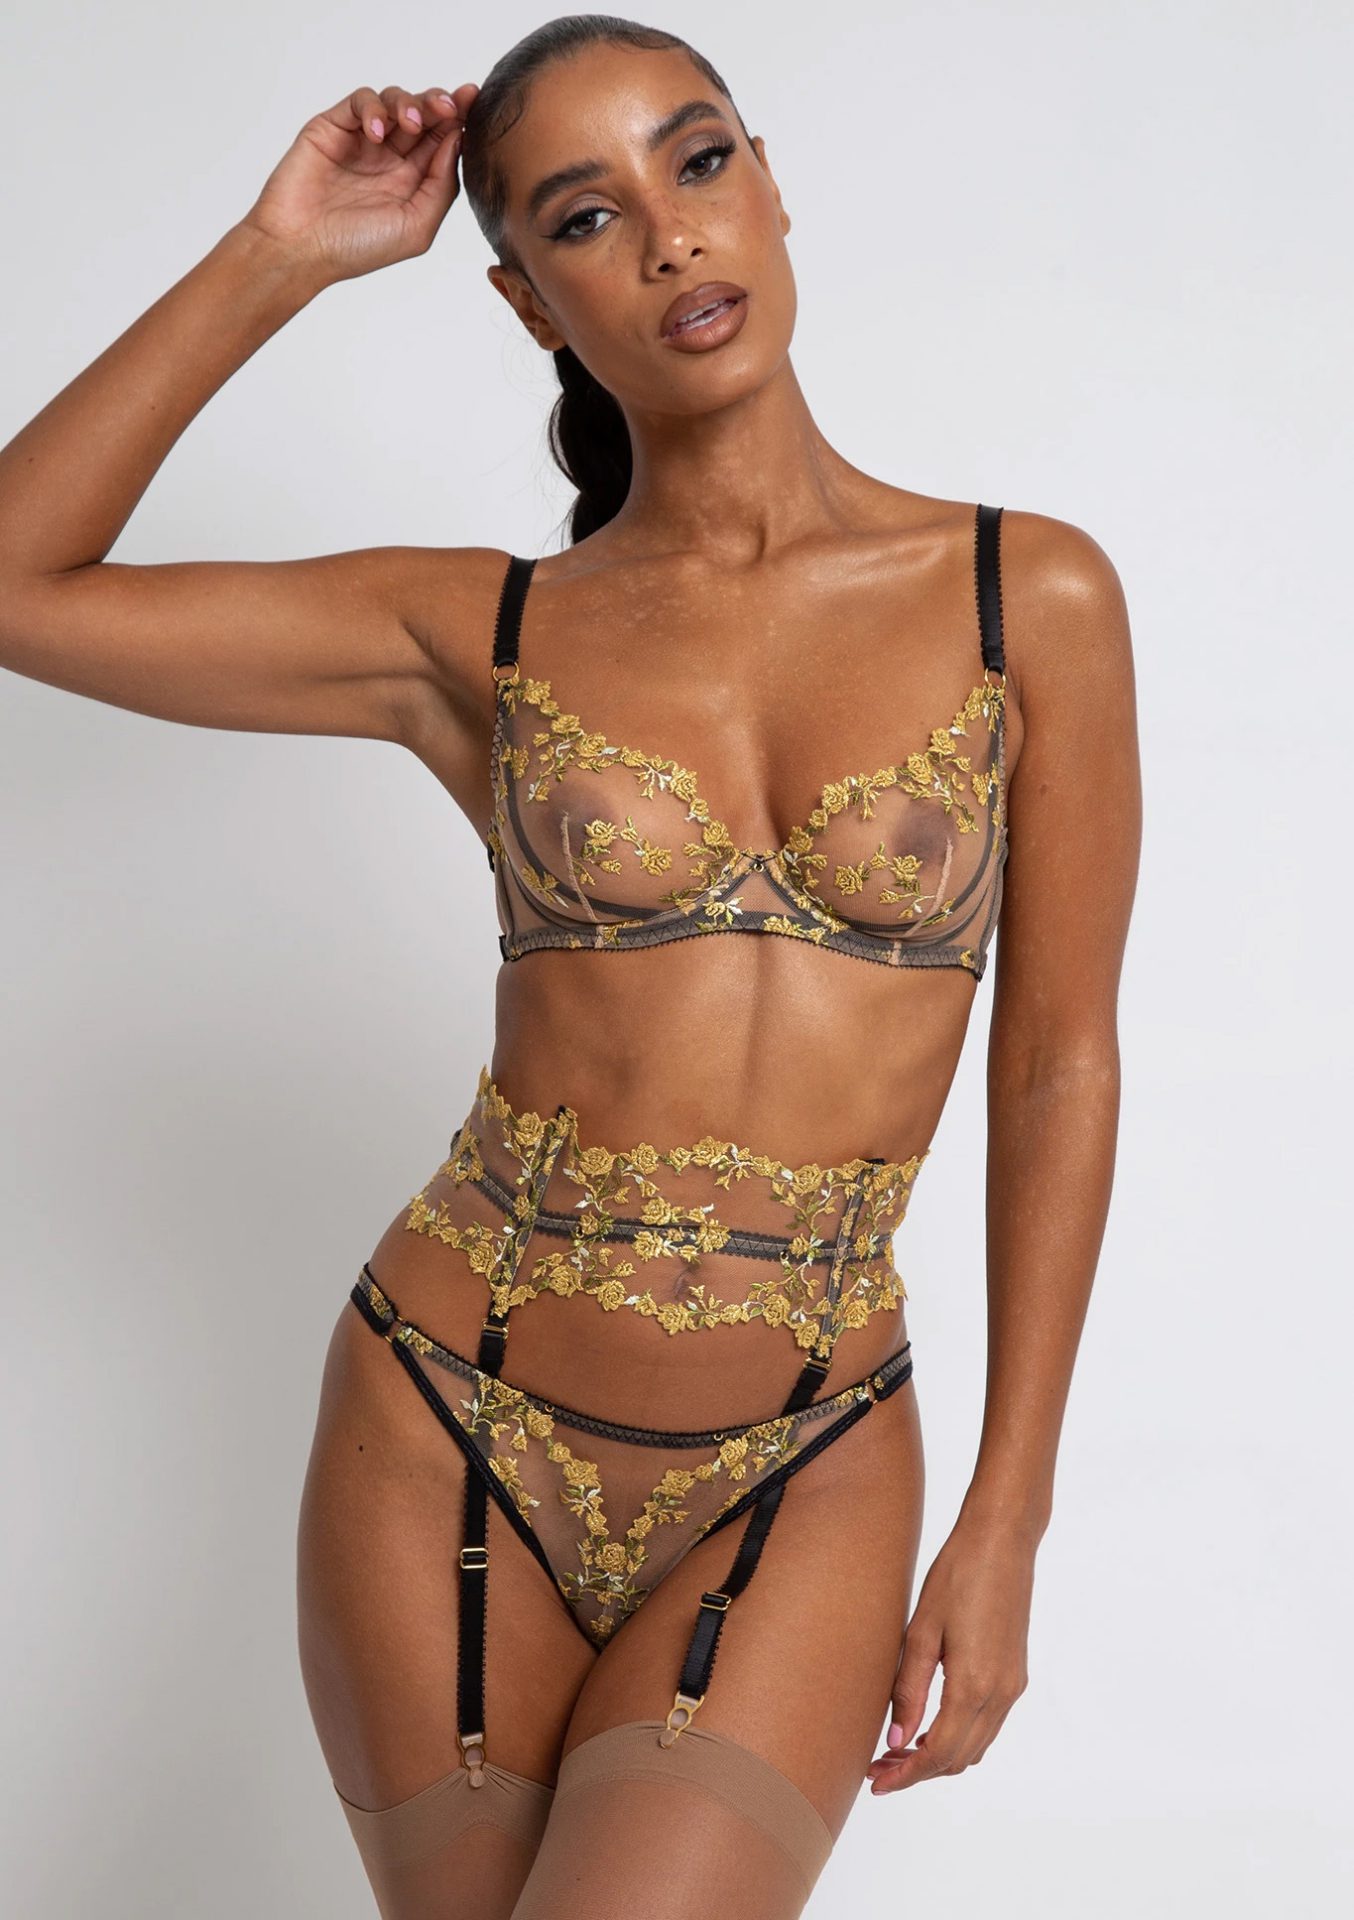 Top Trending New Year Lingerie Collection for 2020